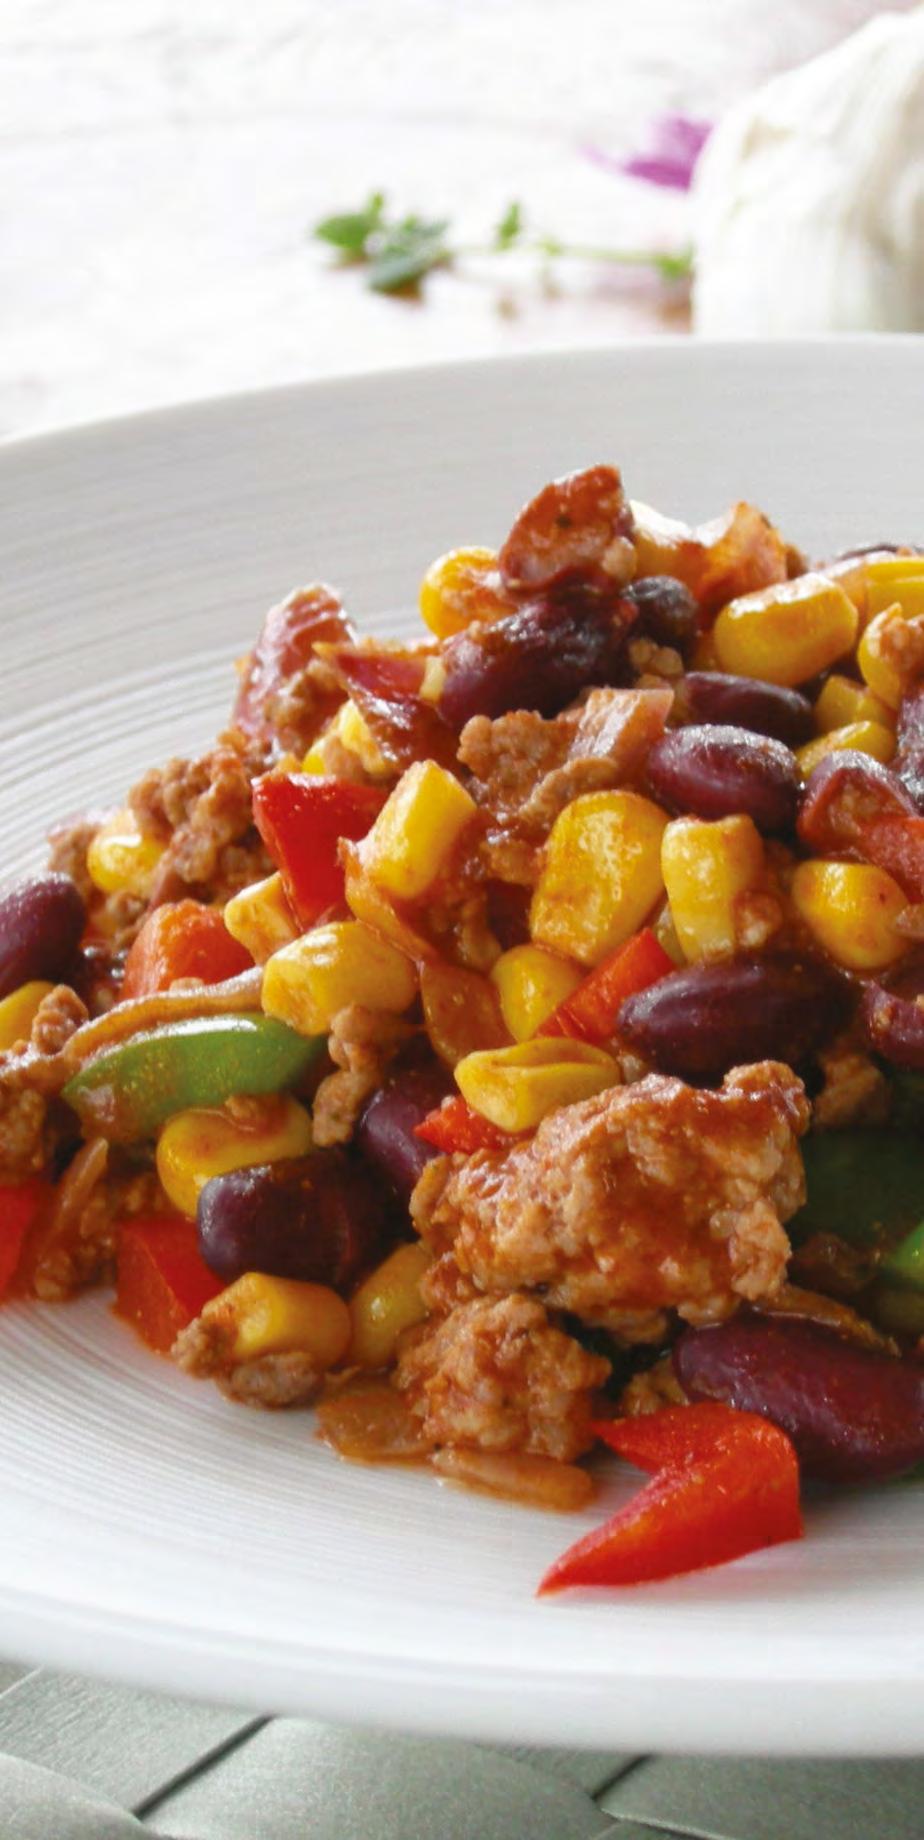 Recipe Chili con Carne For 2 servings: 7 oz lean ground meat (beef) 2 tsp olive oil 1 onion, 1 small chili peppe 1 garlic clove 1 green bell pepper 14 oz canned peeled tomatoes 2 Tbsp tomato paste 4